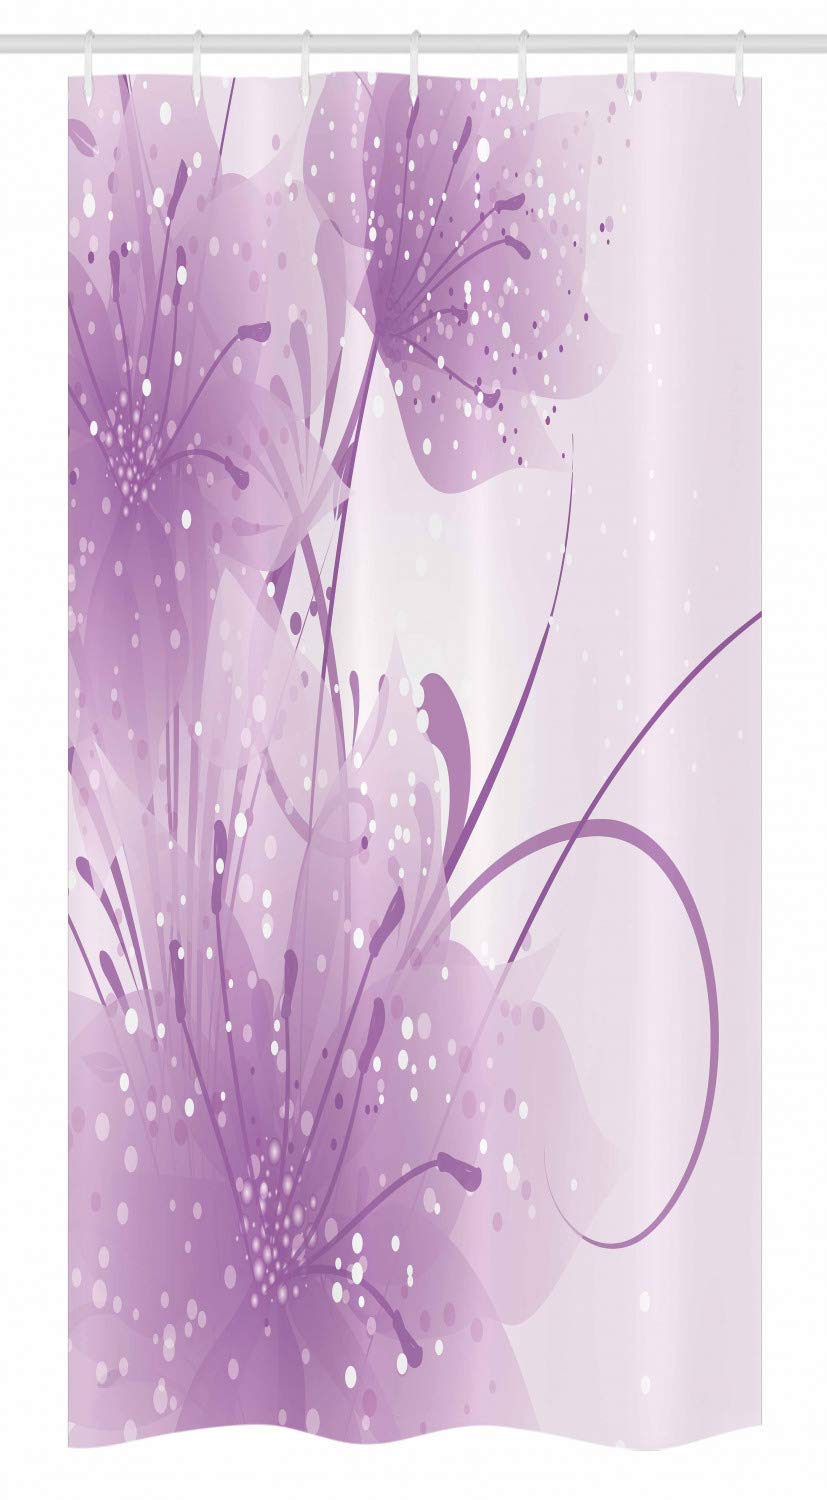 Ambesonne Purple Stall Shower Curtain, Abstract Art Style Vector Illustration of Flower Background with Butterfly, Fabric Bathroom Decor Set with Hooks, 36 W x 72 L Inches, Violet and White